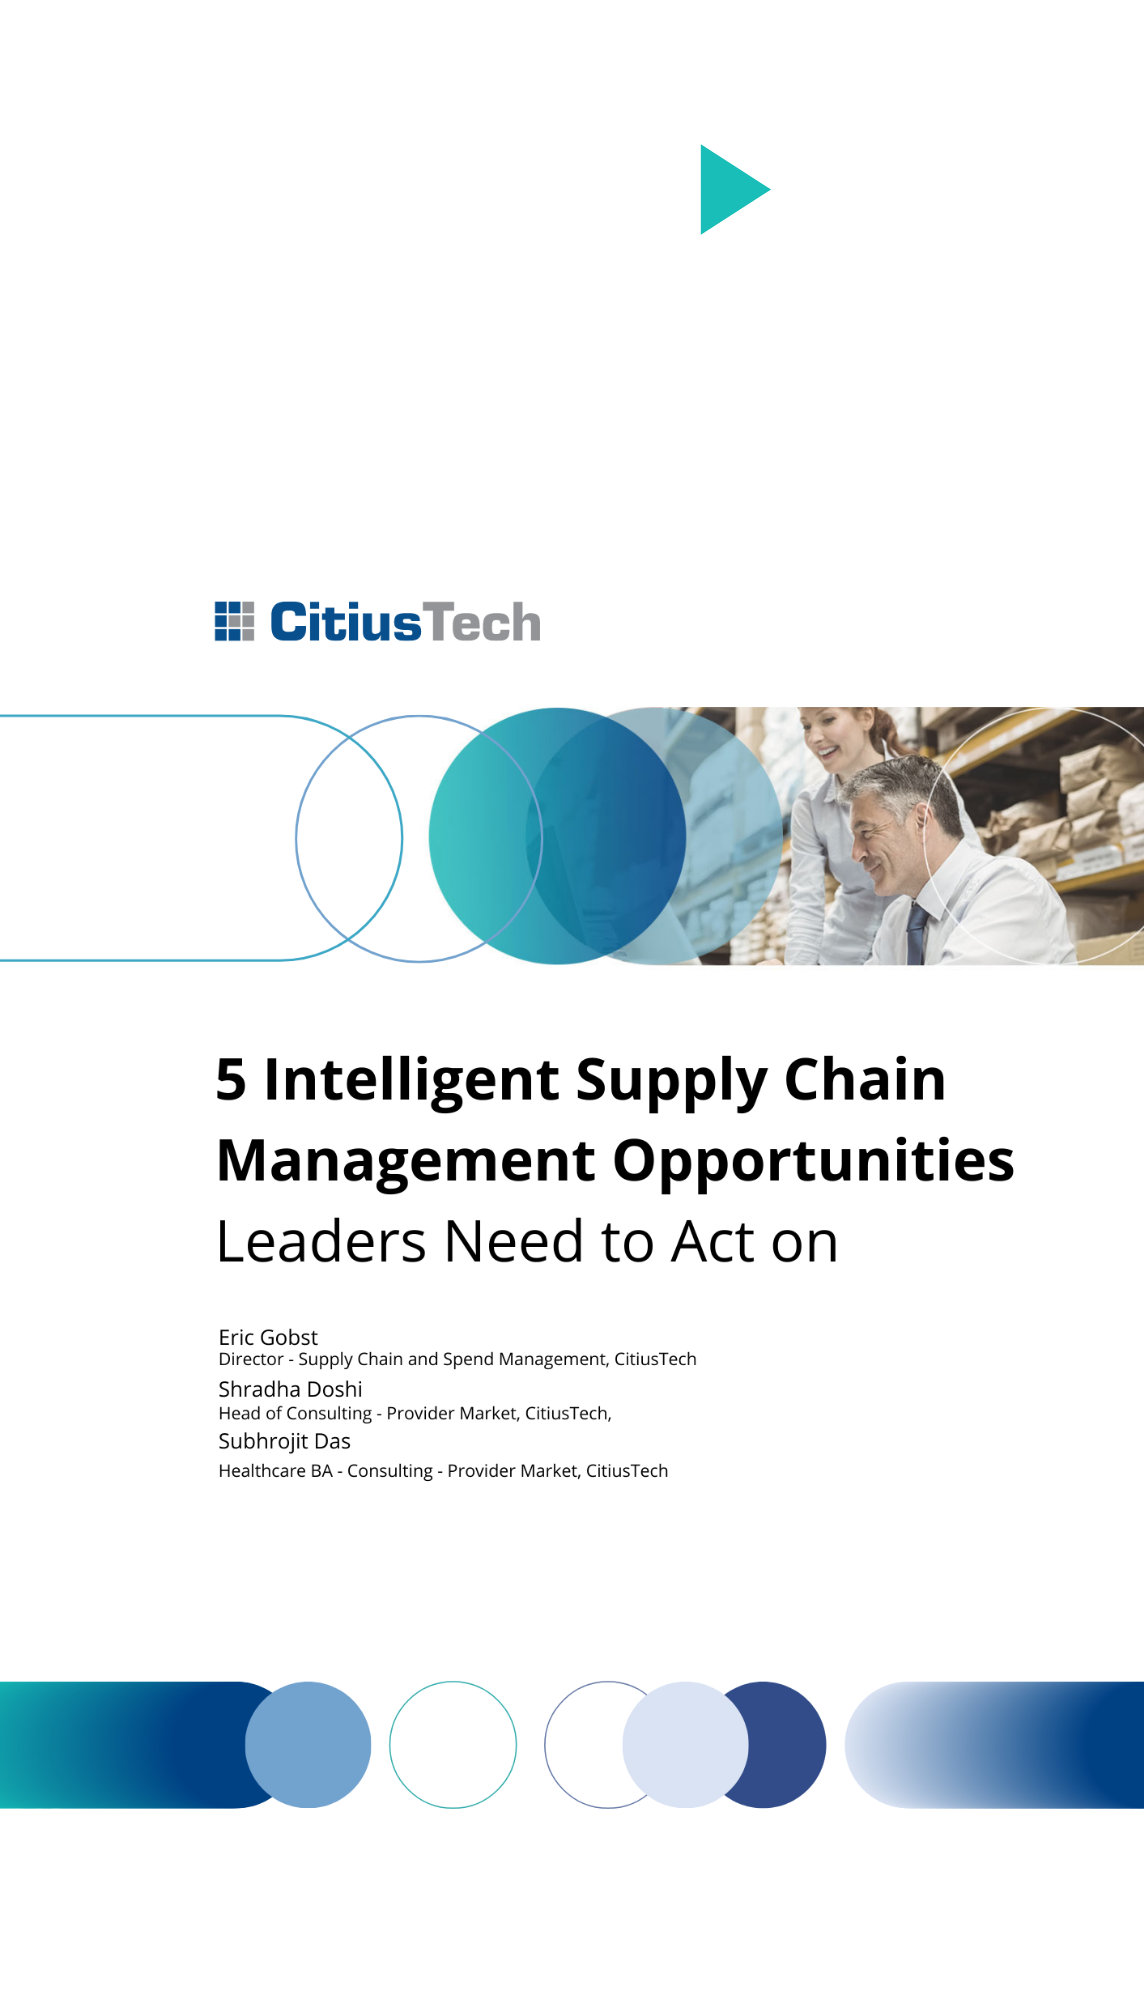 5 Intelligent Supply Chain Management Opportunities Leaders Need to Act on